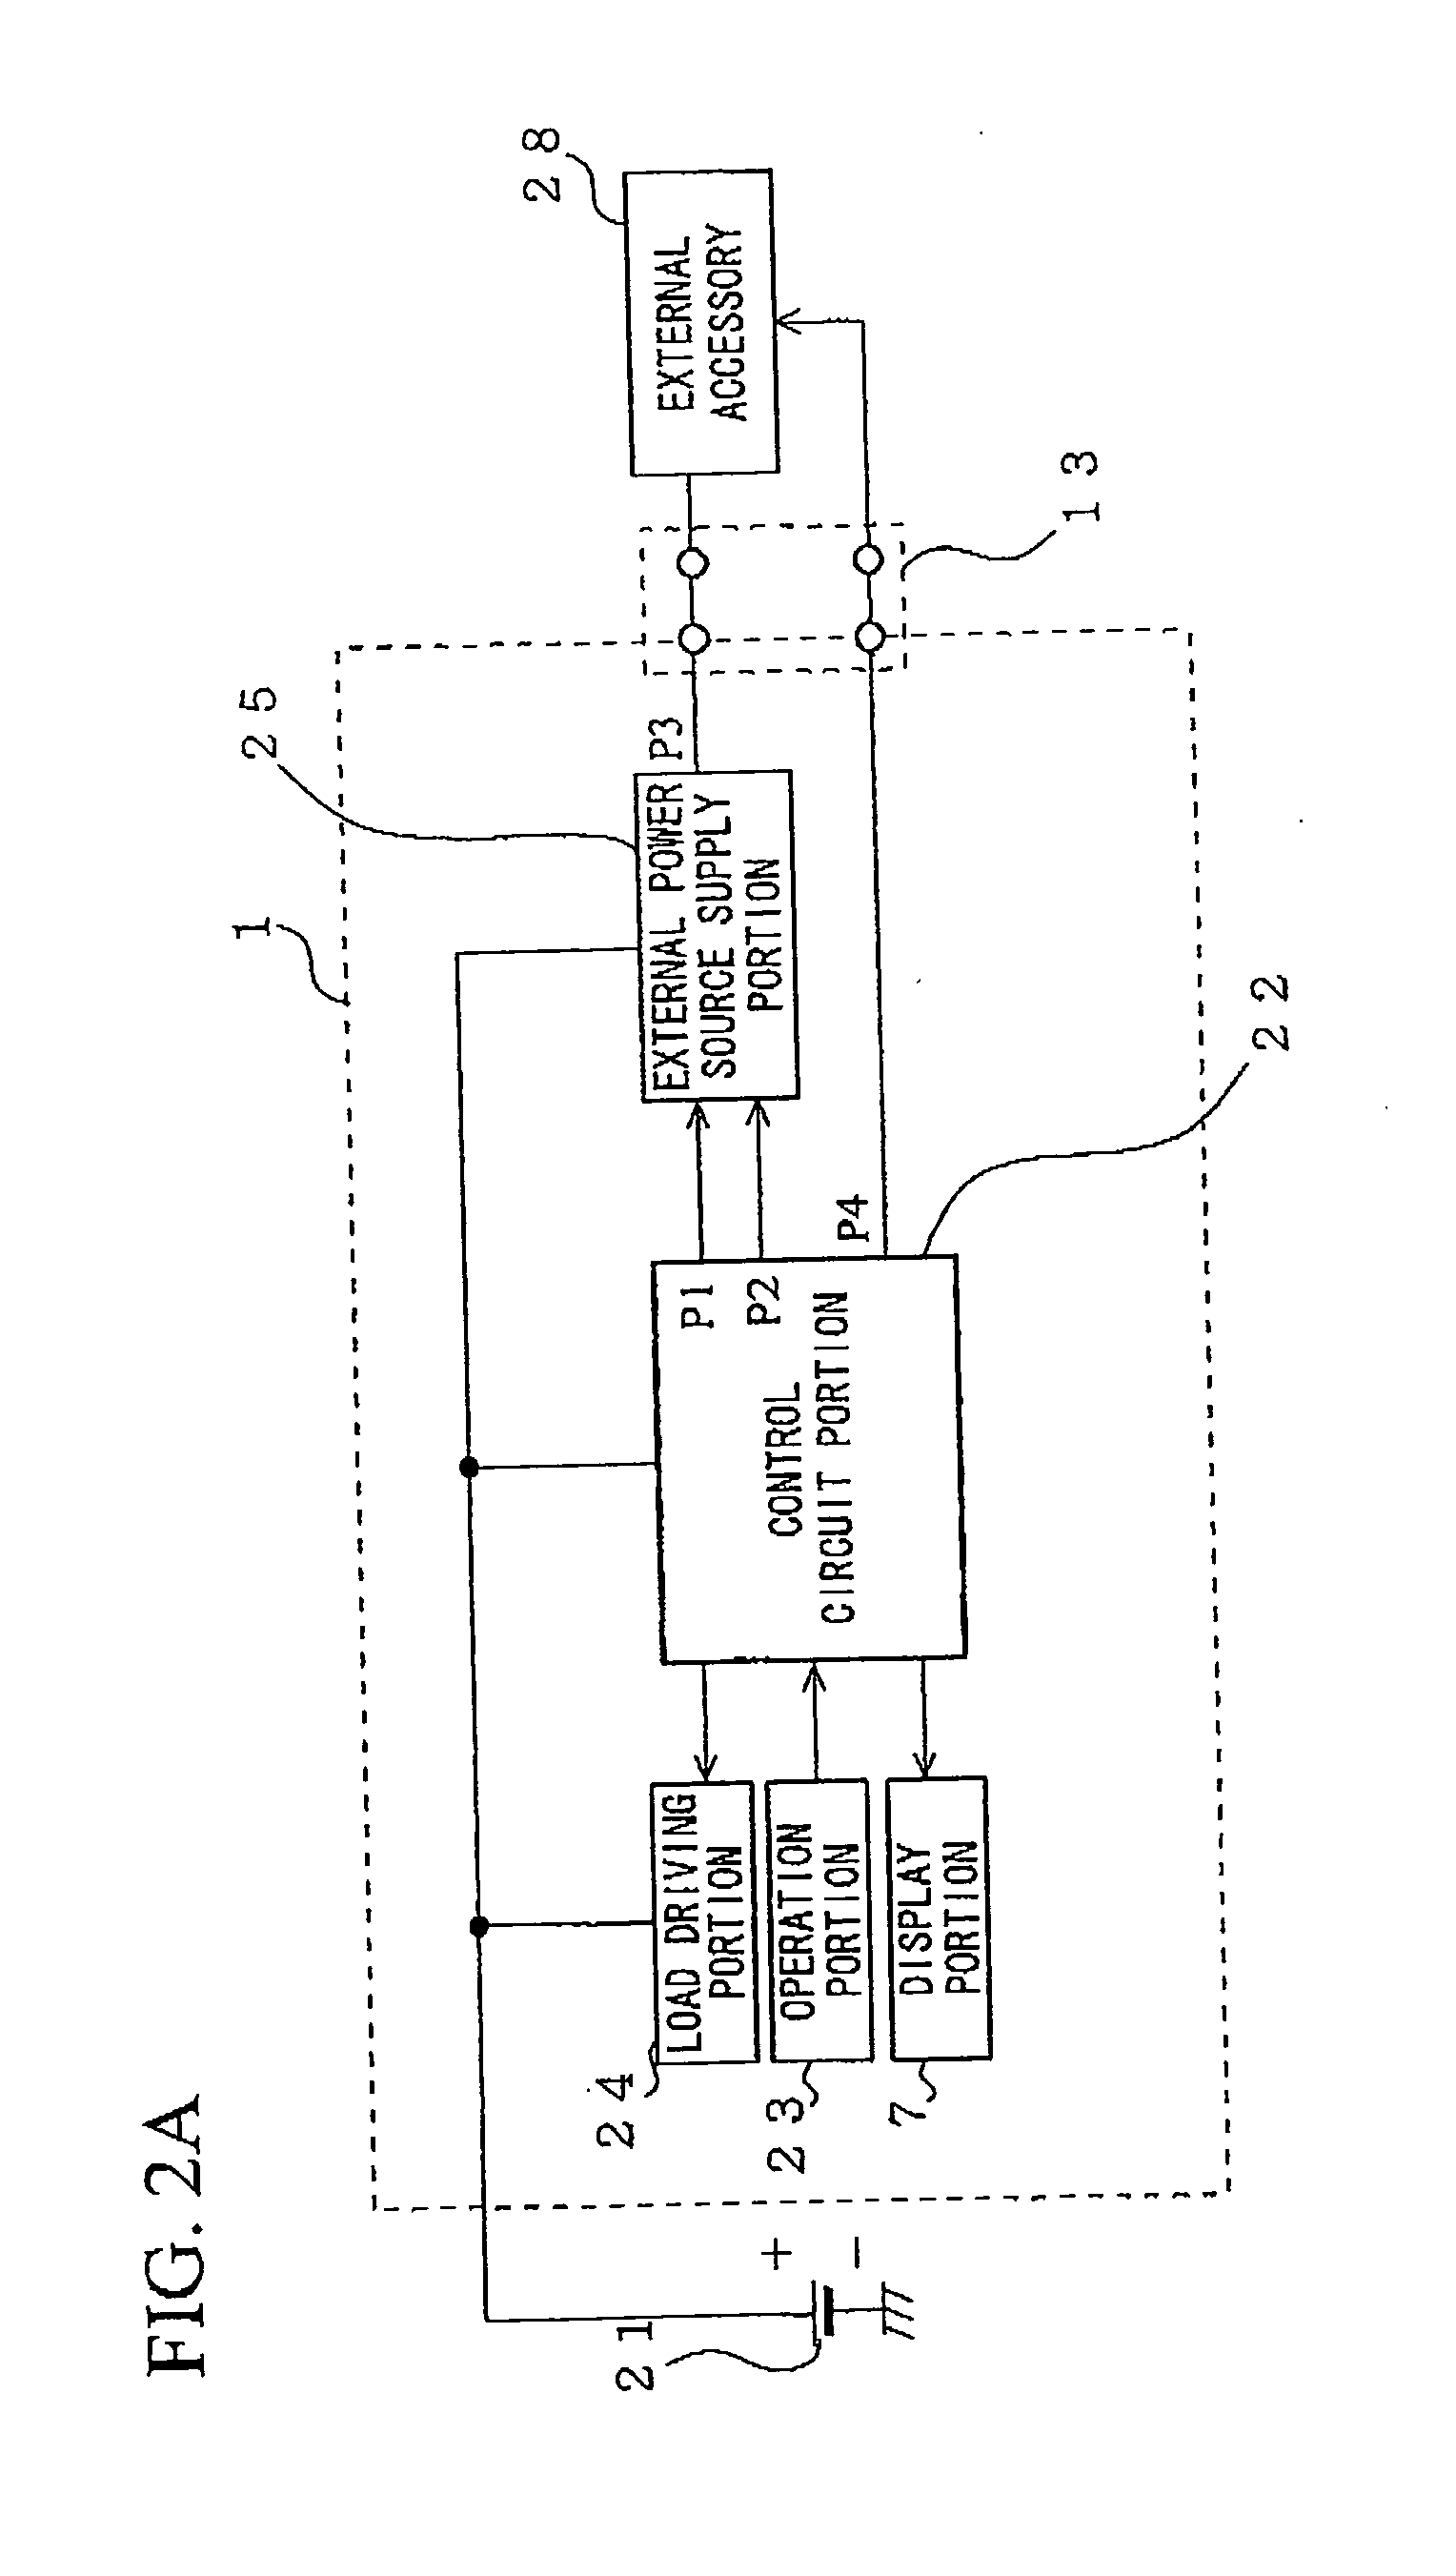 Electronic equipment, accessory and camera system